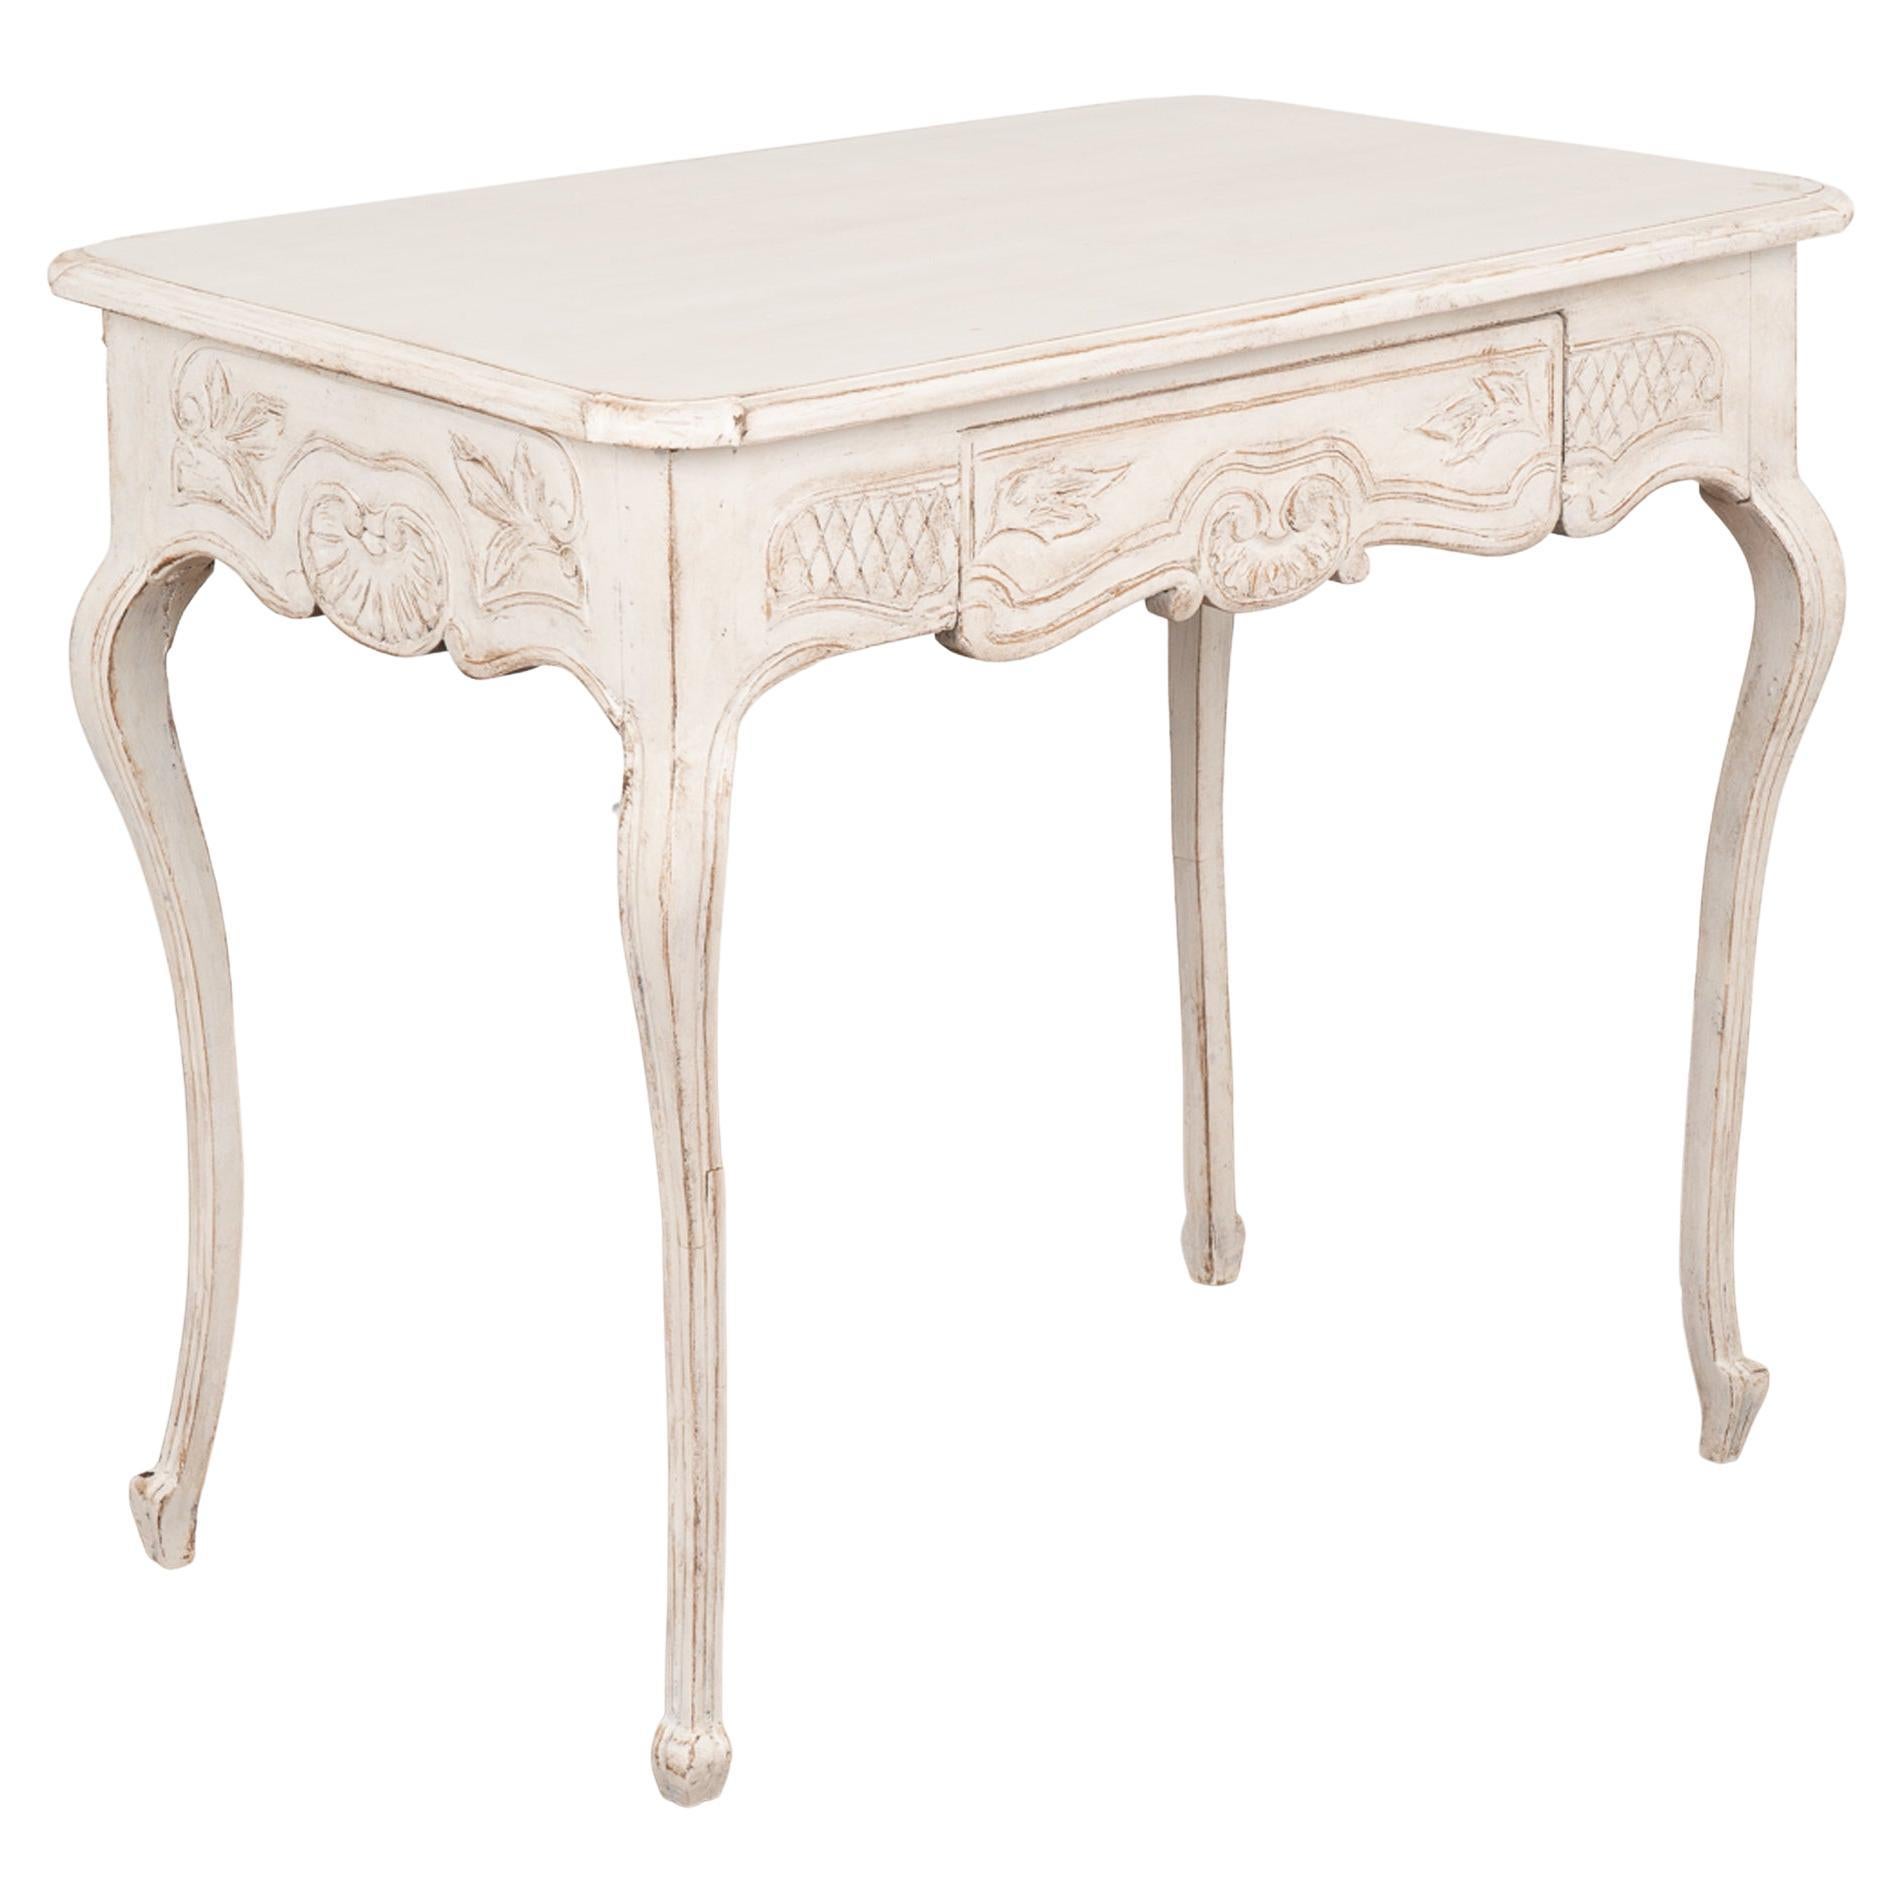 Gustavian White Painted Side Table With Drawer, Sweden circa 1820-40